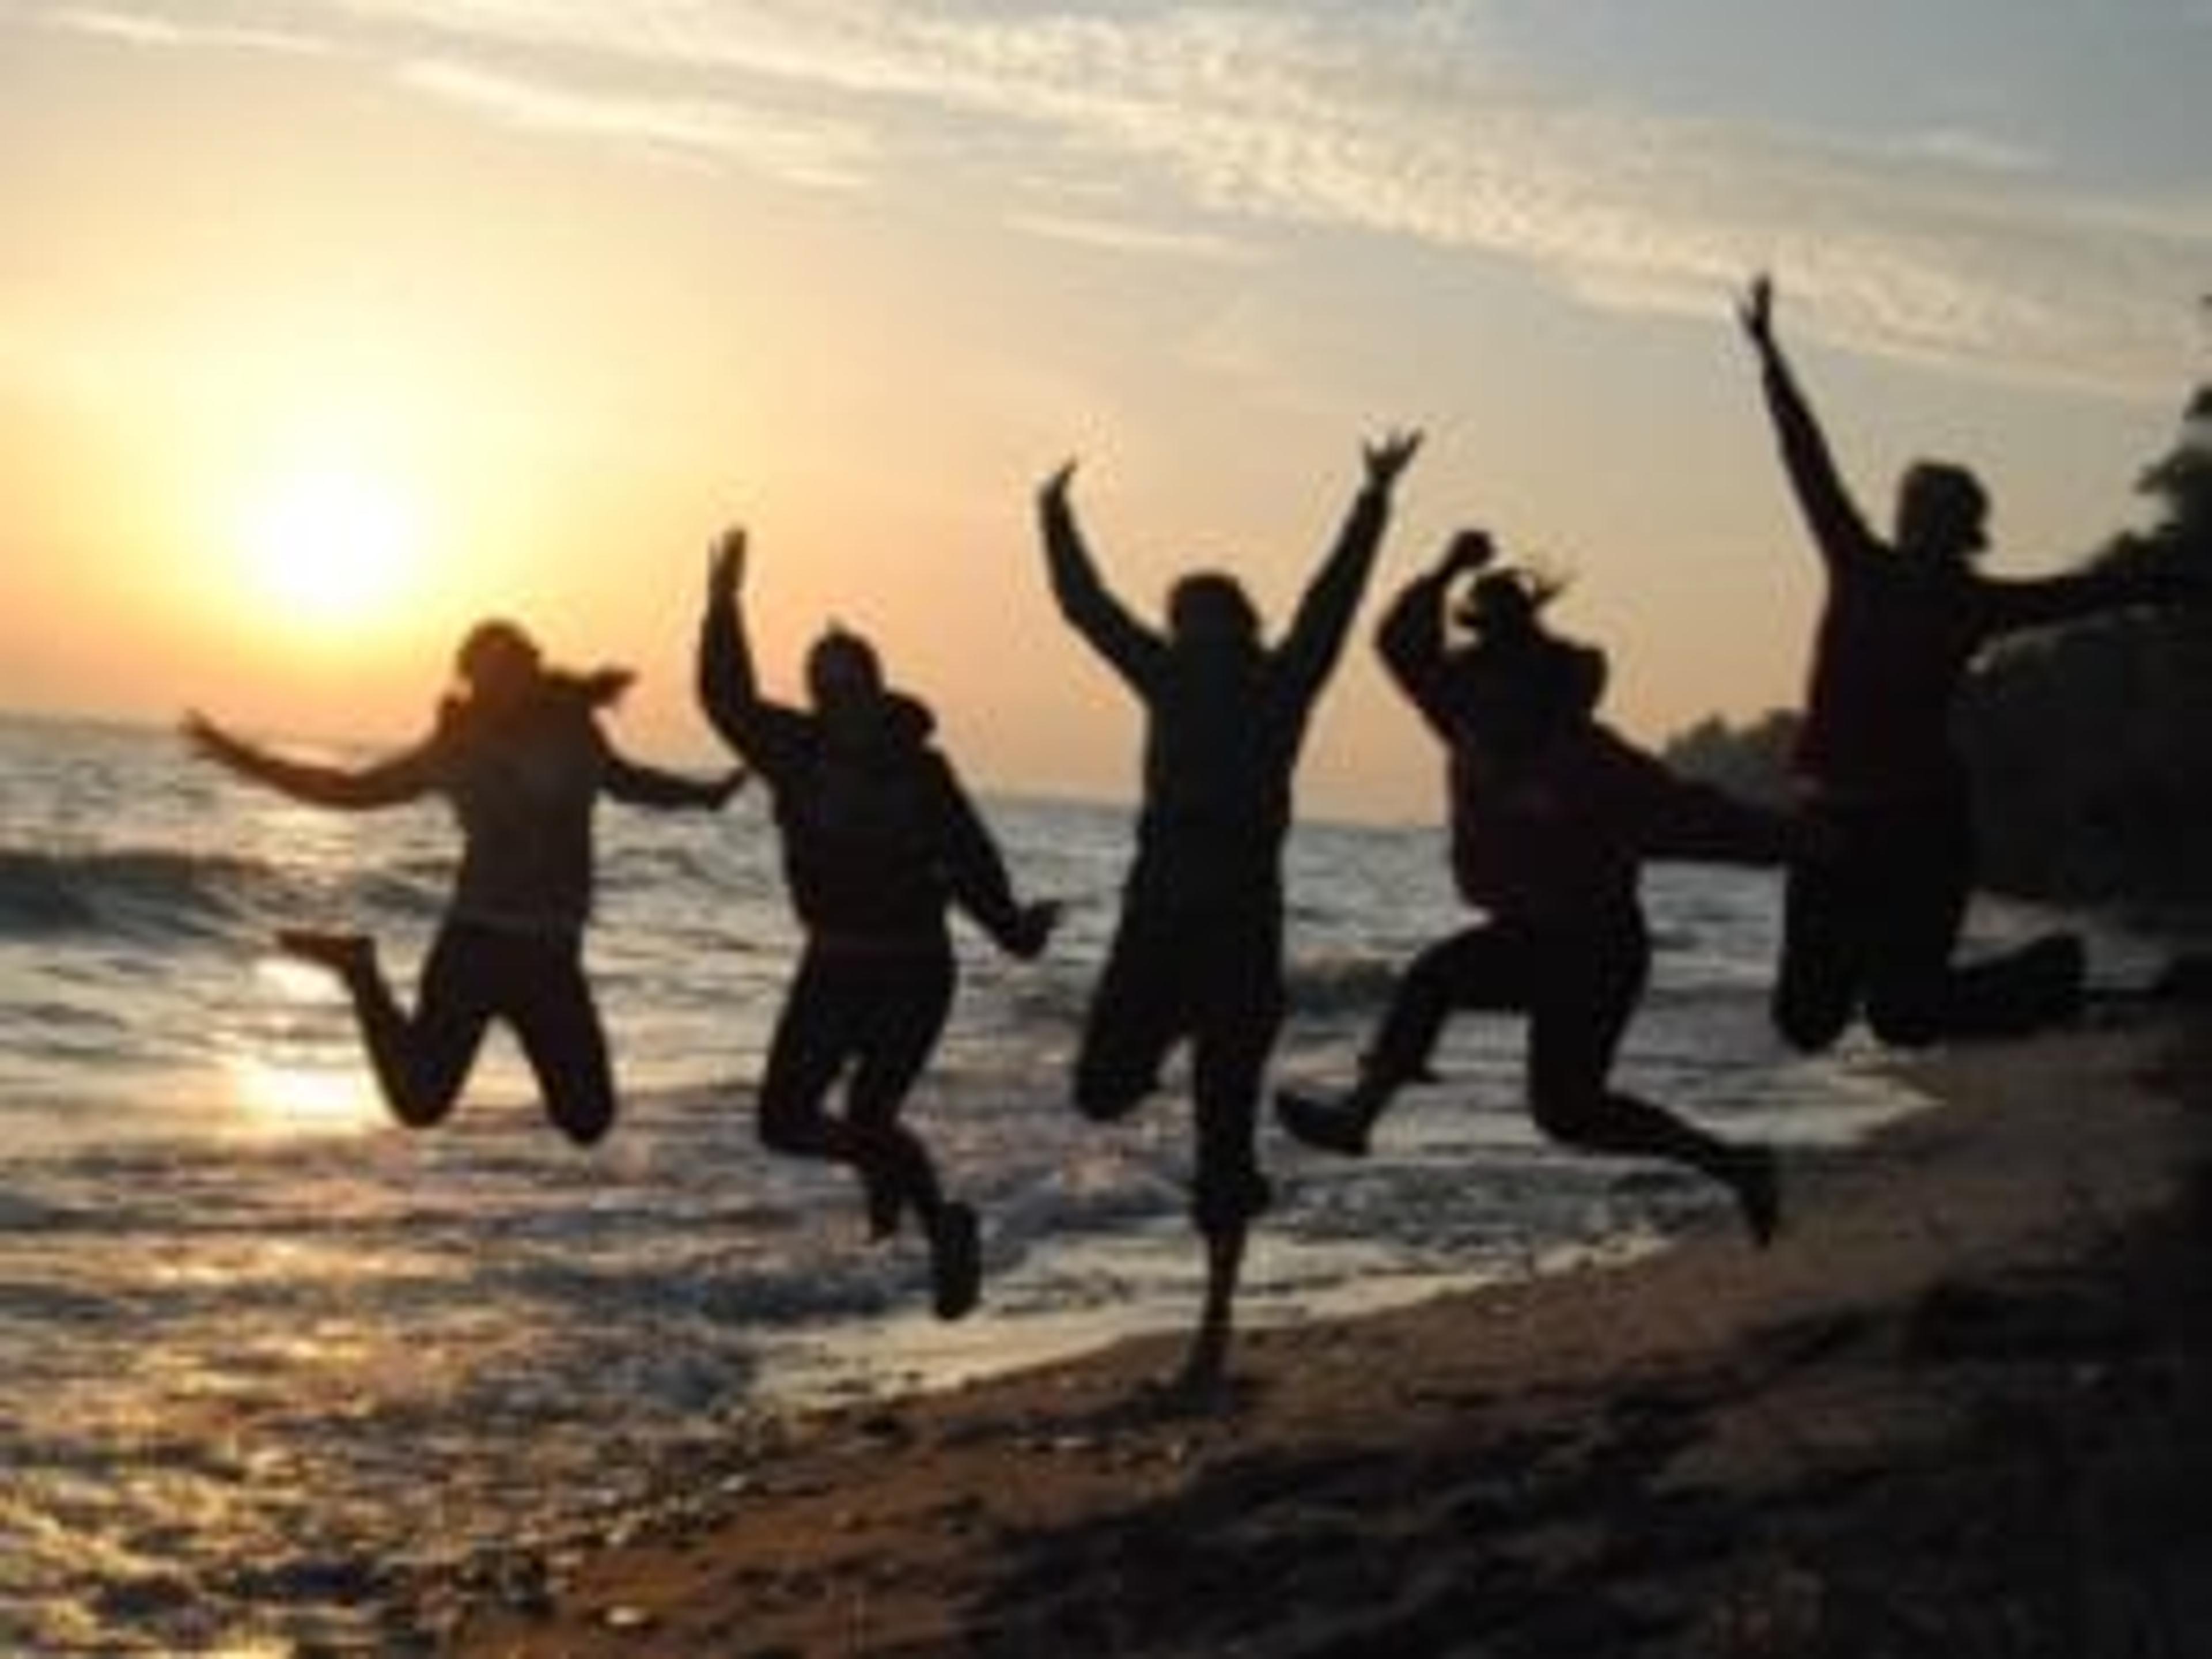 the group jumping on a beach with a sunset in the background